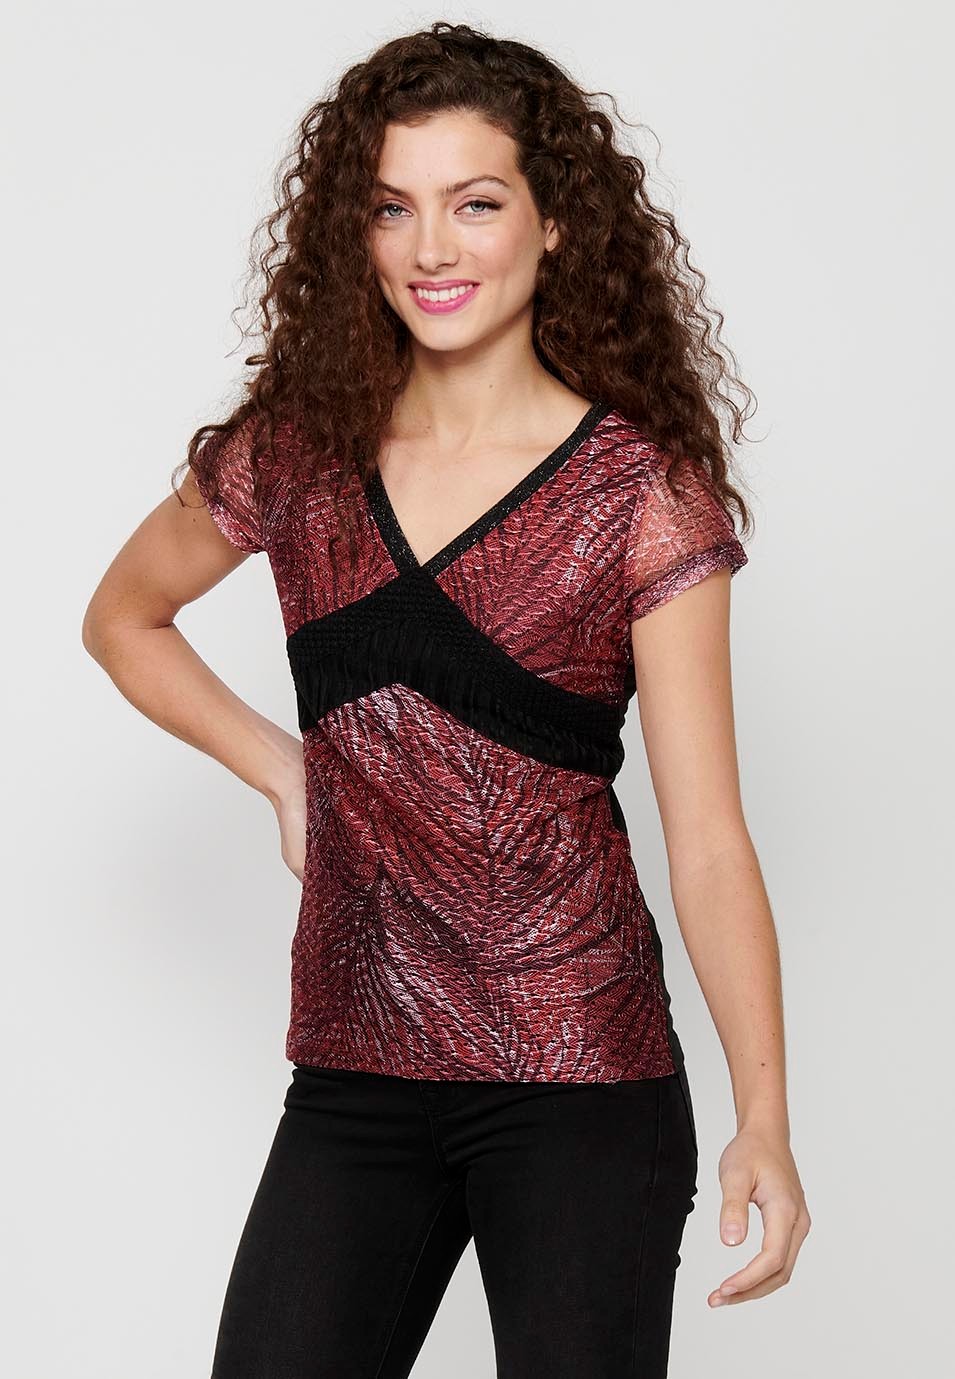 Short-sleeved T-shirt with V-neckline in Maroon Color for Women